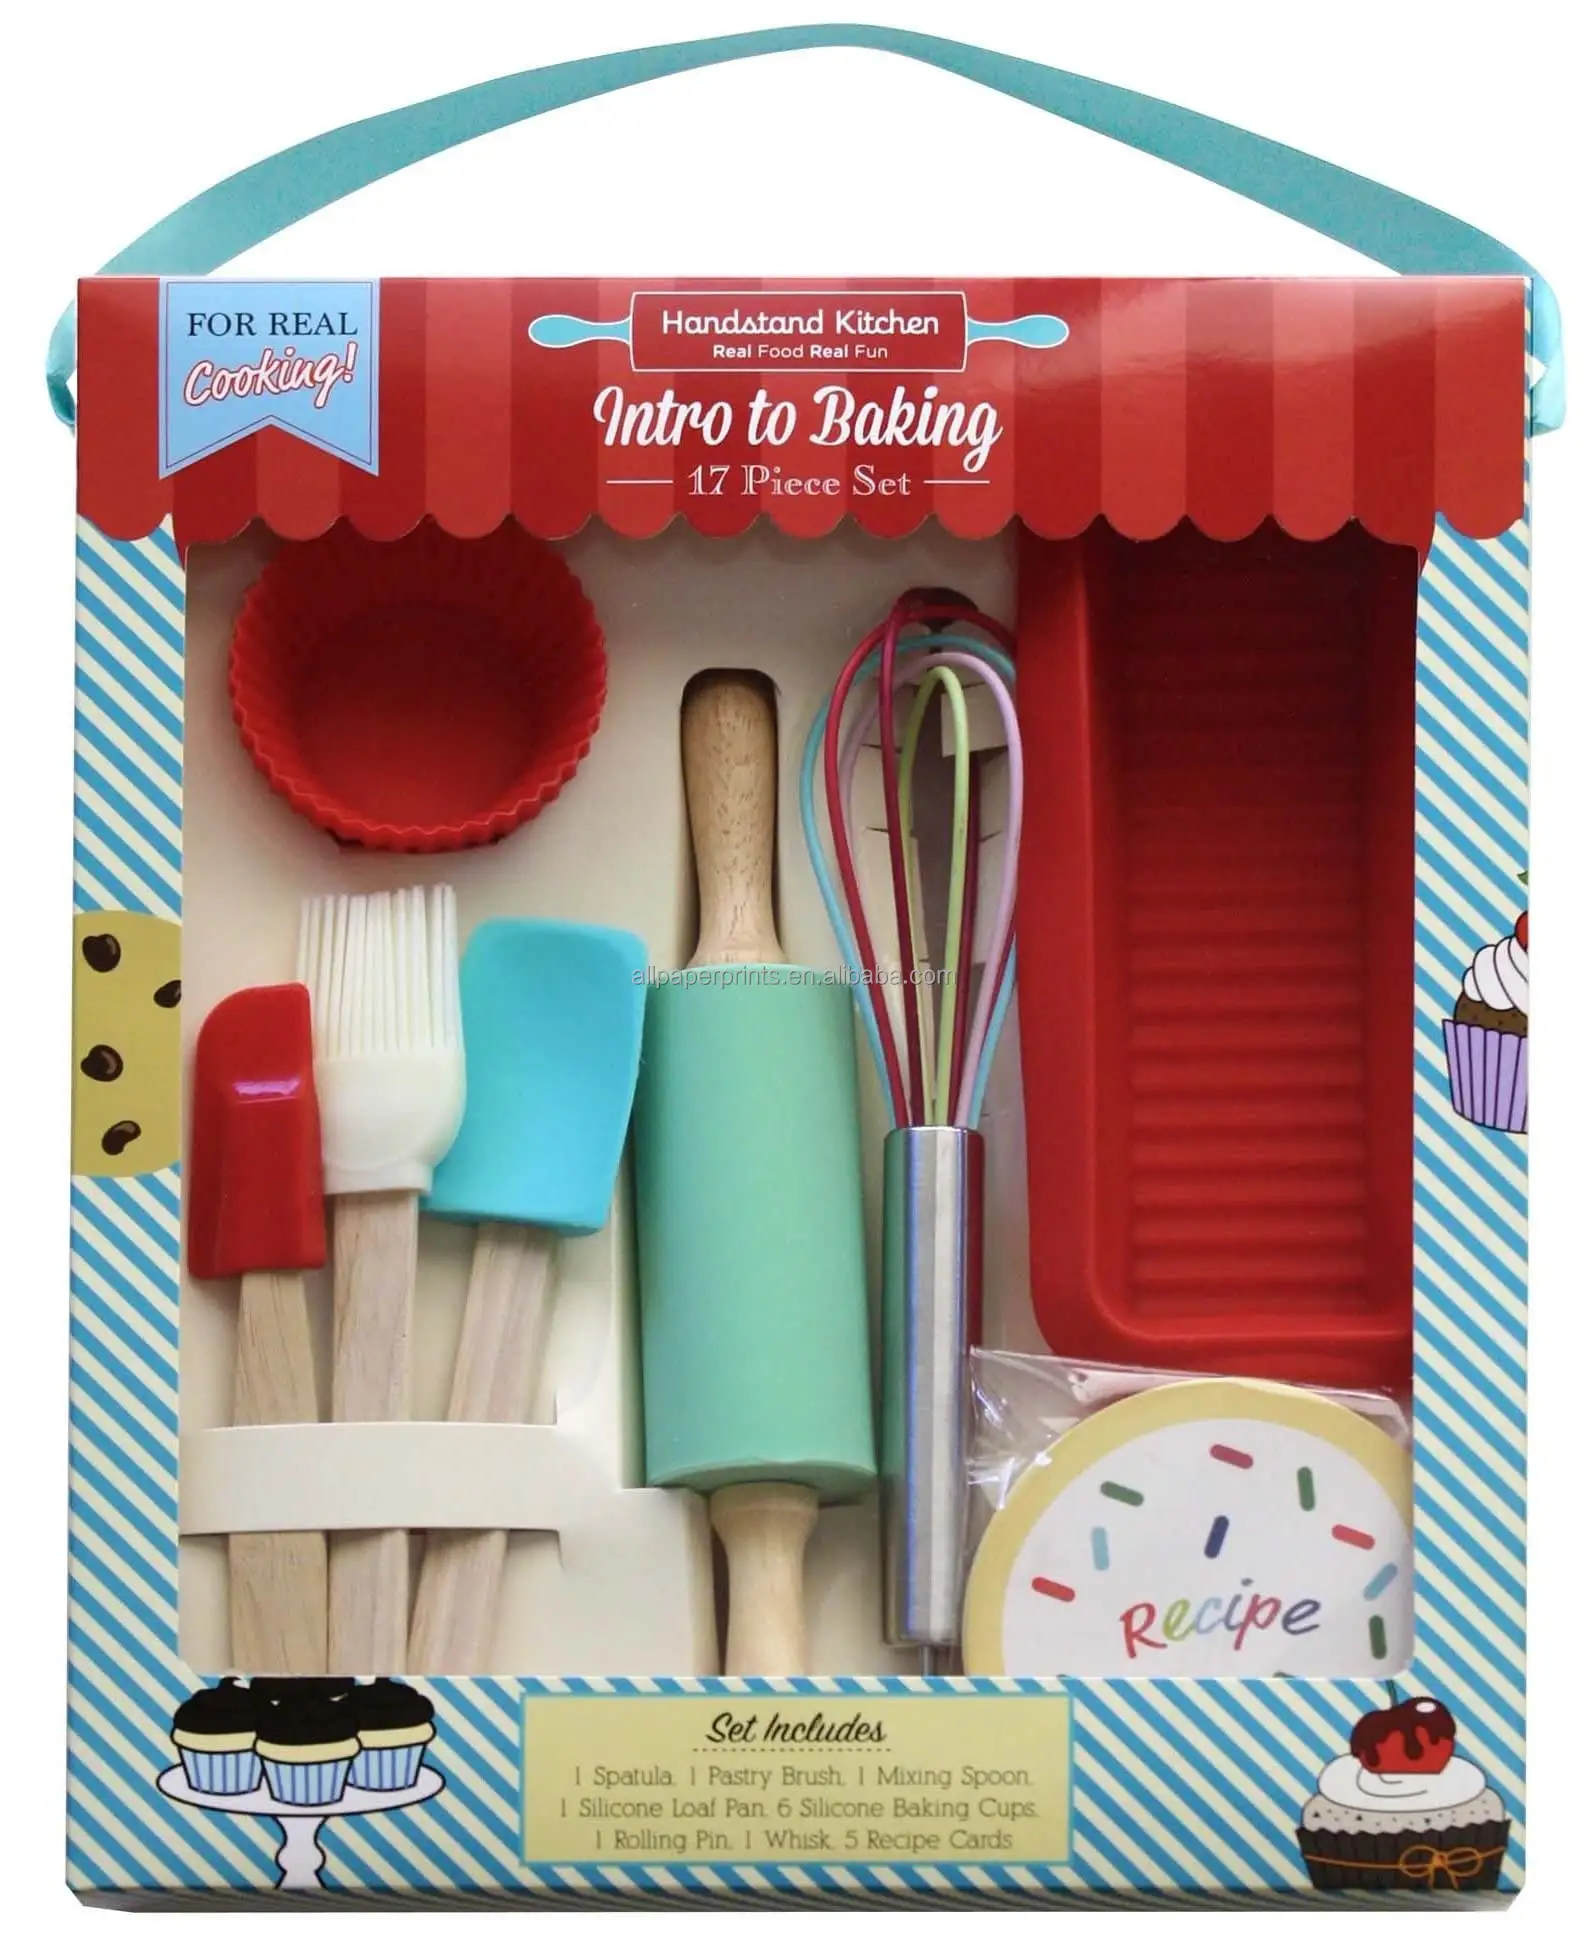 Handstand Kitchen Bake Shoppe 25-piece Deluxe Real Baking Set with Recipes for Kids